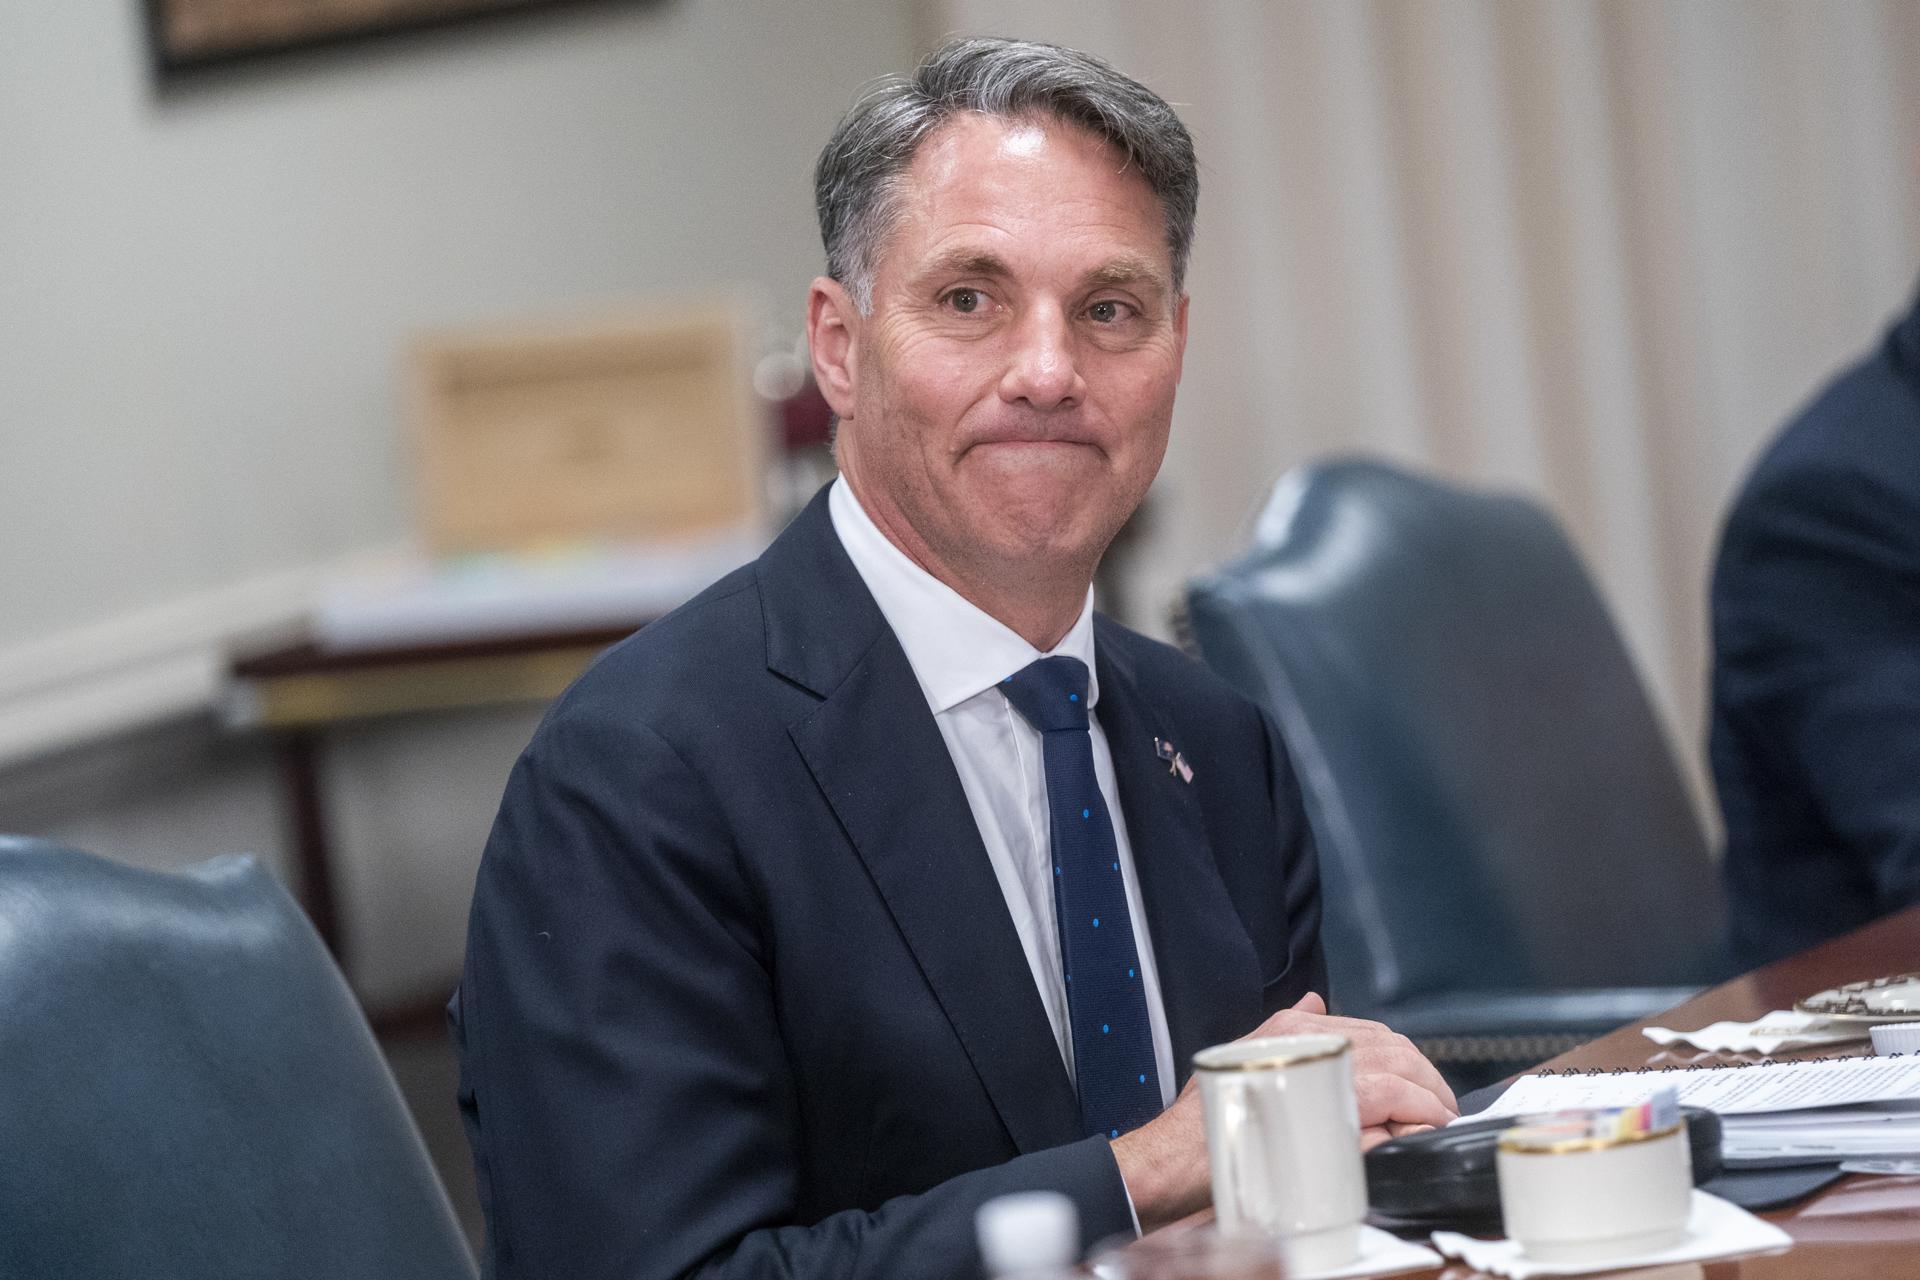 Australian Minister of Defense Richard Marles delivers remarks during a meeting with US Secretary of Defense Lloyd Austin at the Pentagon in Arlington, Virginia, US, 13 July 2022. EFE-EPA FILE/SHAWN THEW